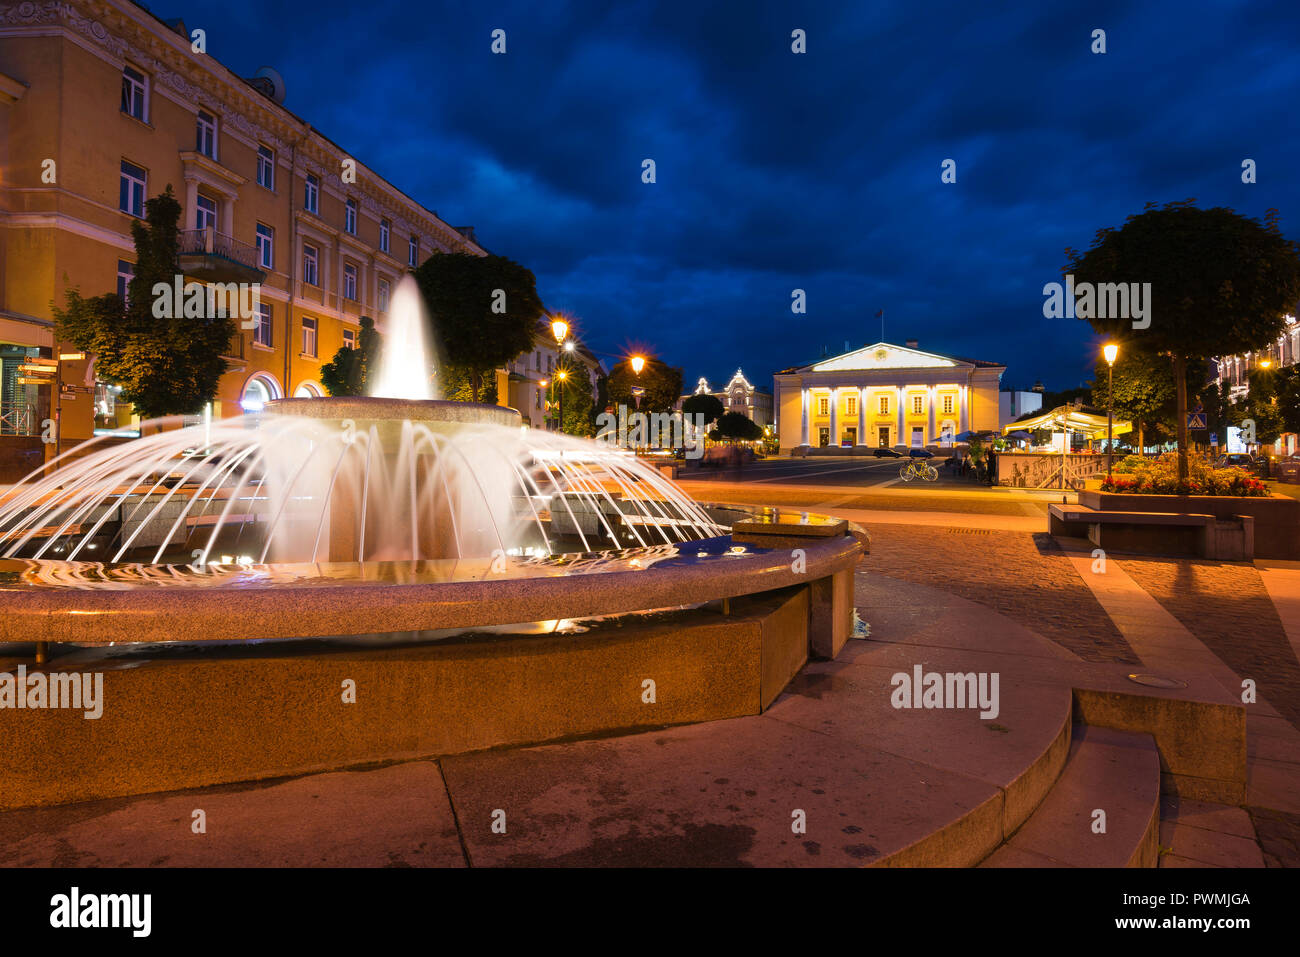 Vilnius Town Hall Square, view at night of the Town Hall Square (Rotuses aikste) in the centre of Vilnius Old Town, Lithuania. Stock Photo